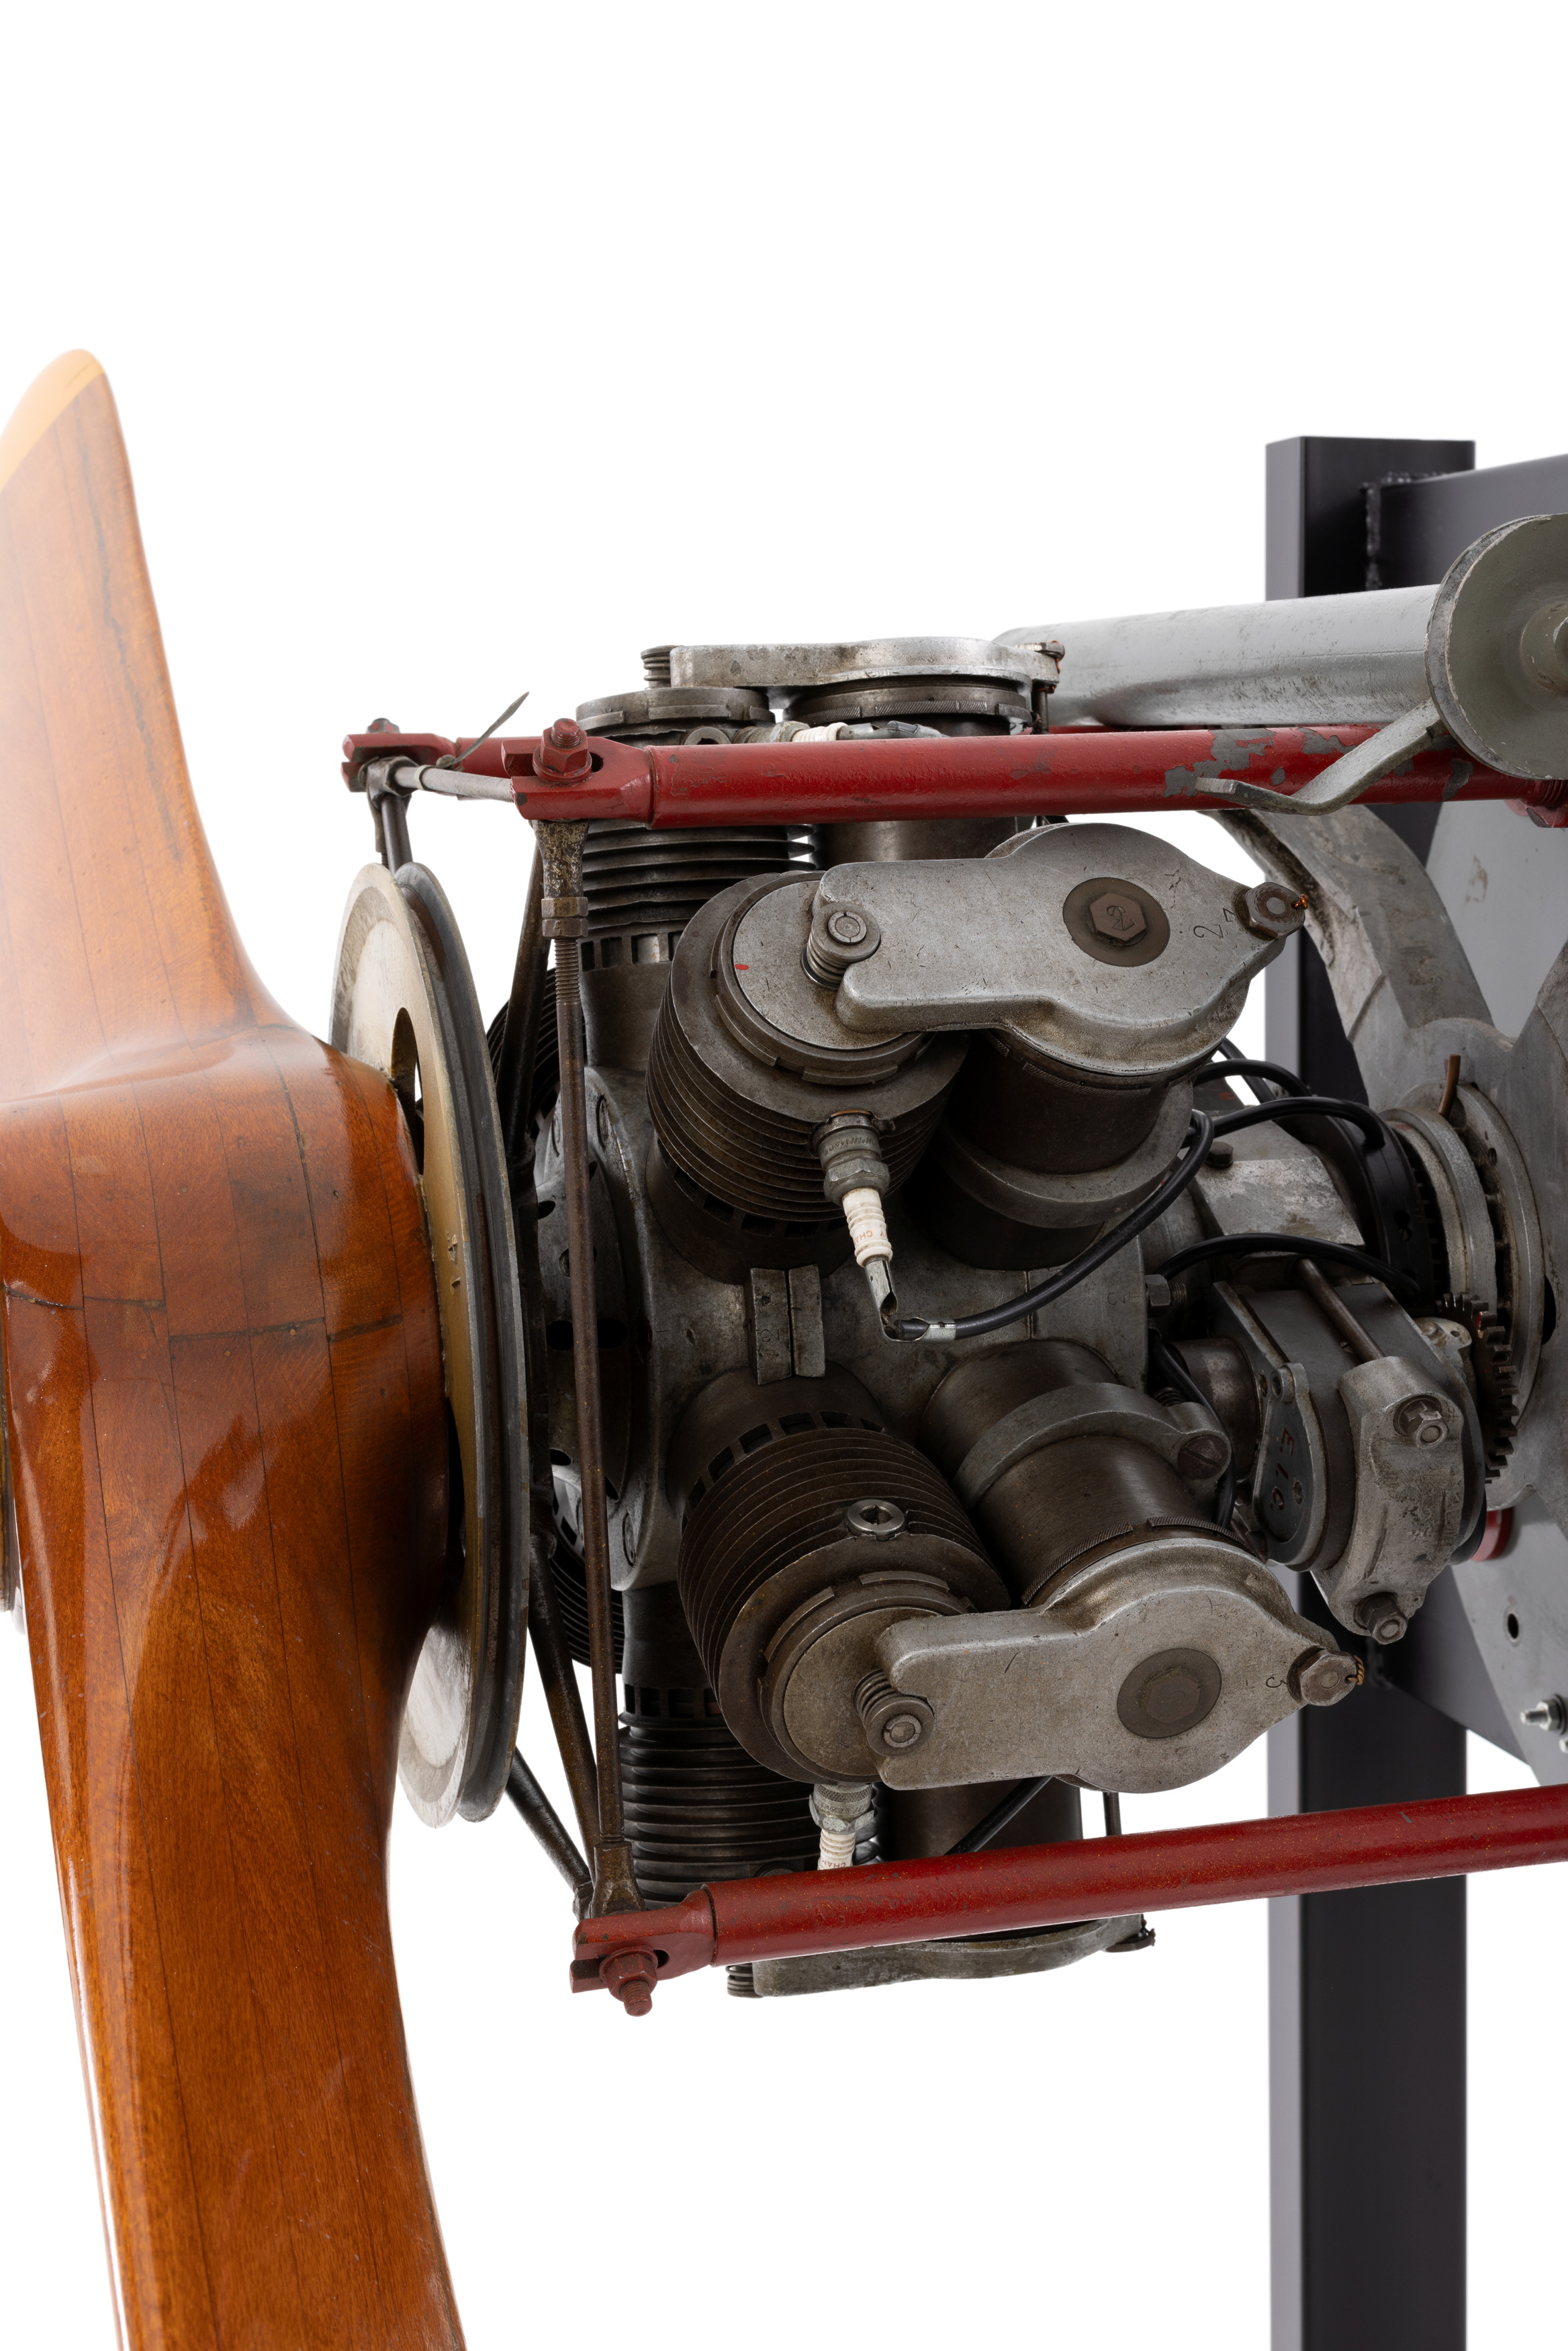 Aero engine designed by Archibald Richardson and made by Harold 'Curly' Eagle